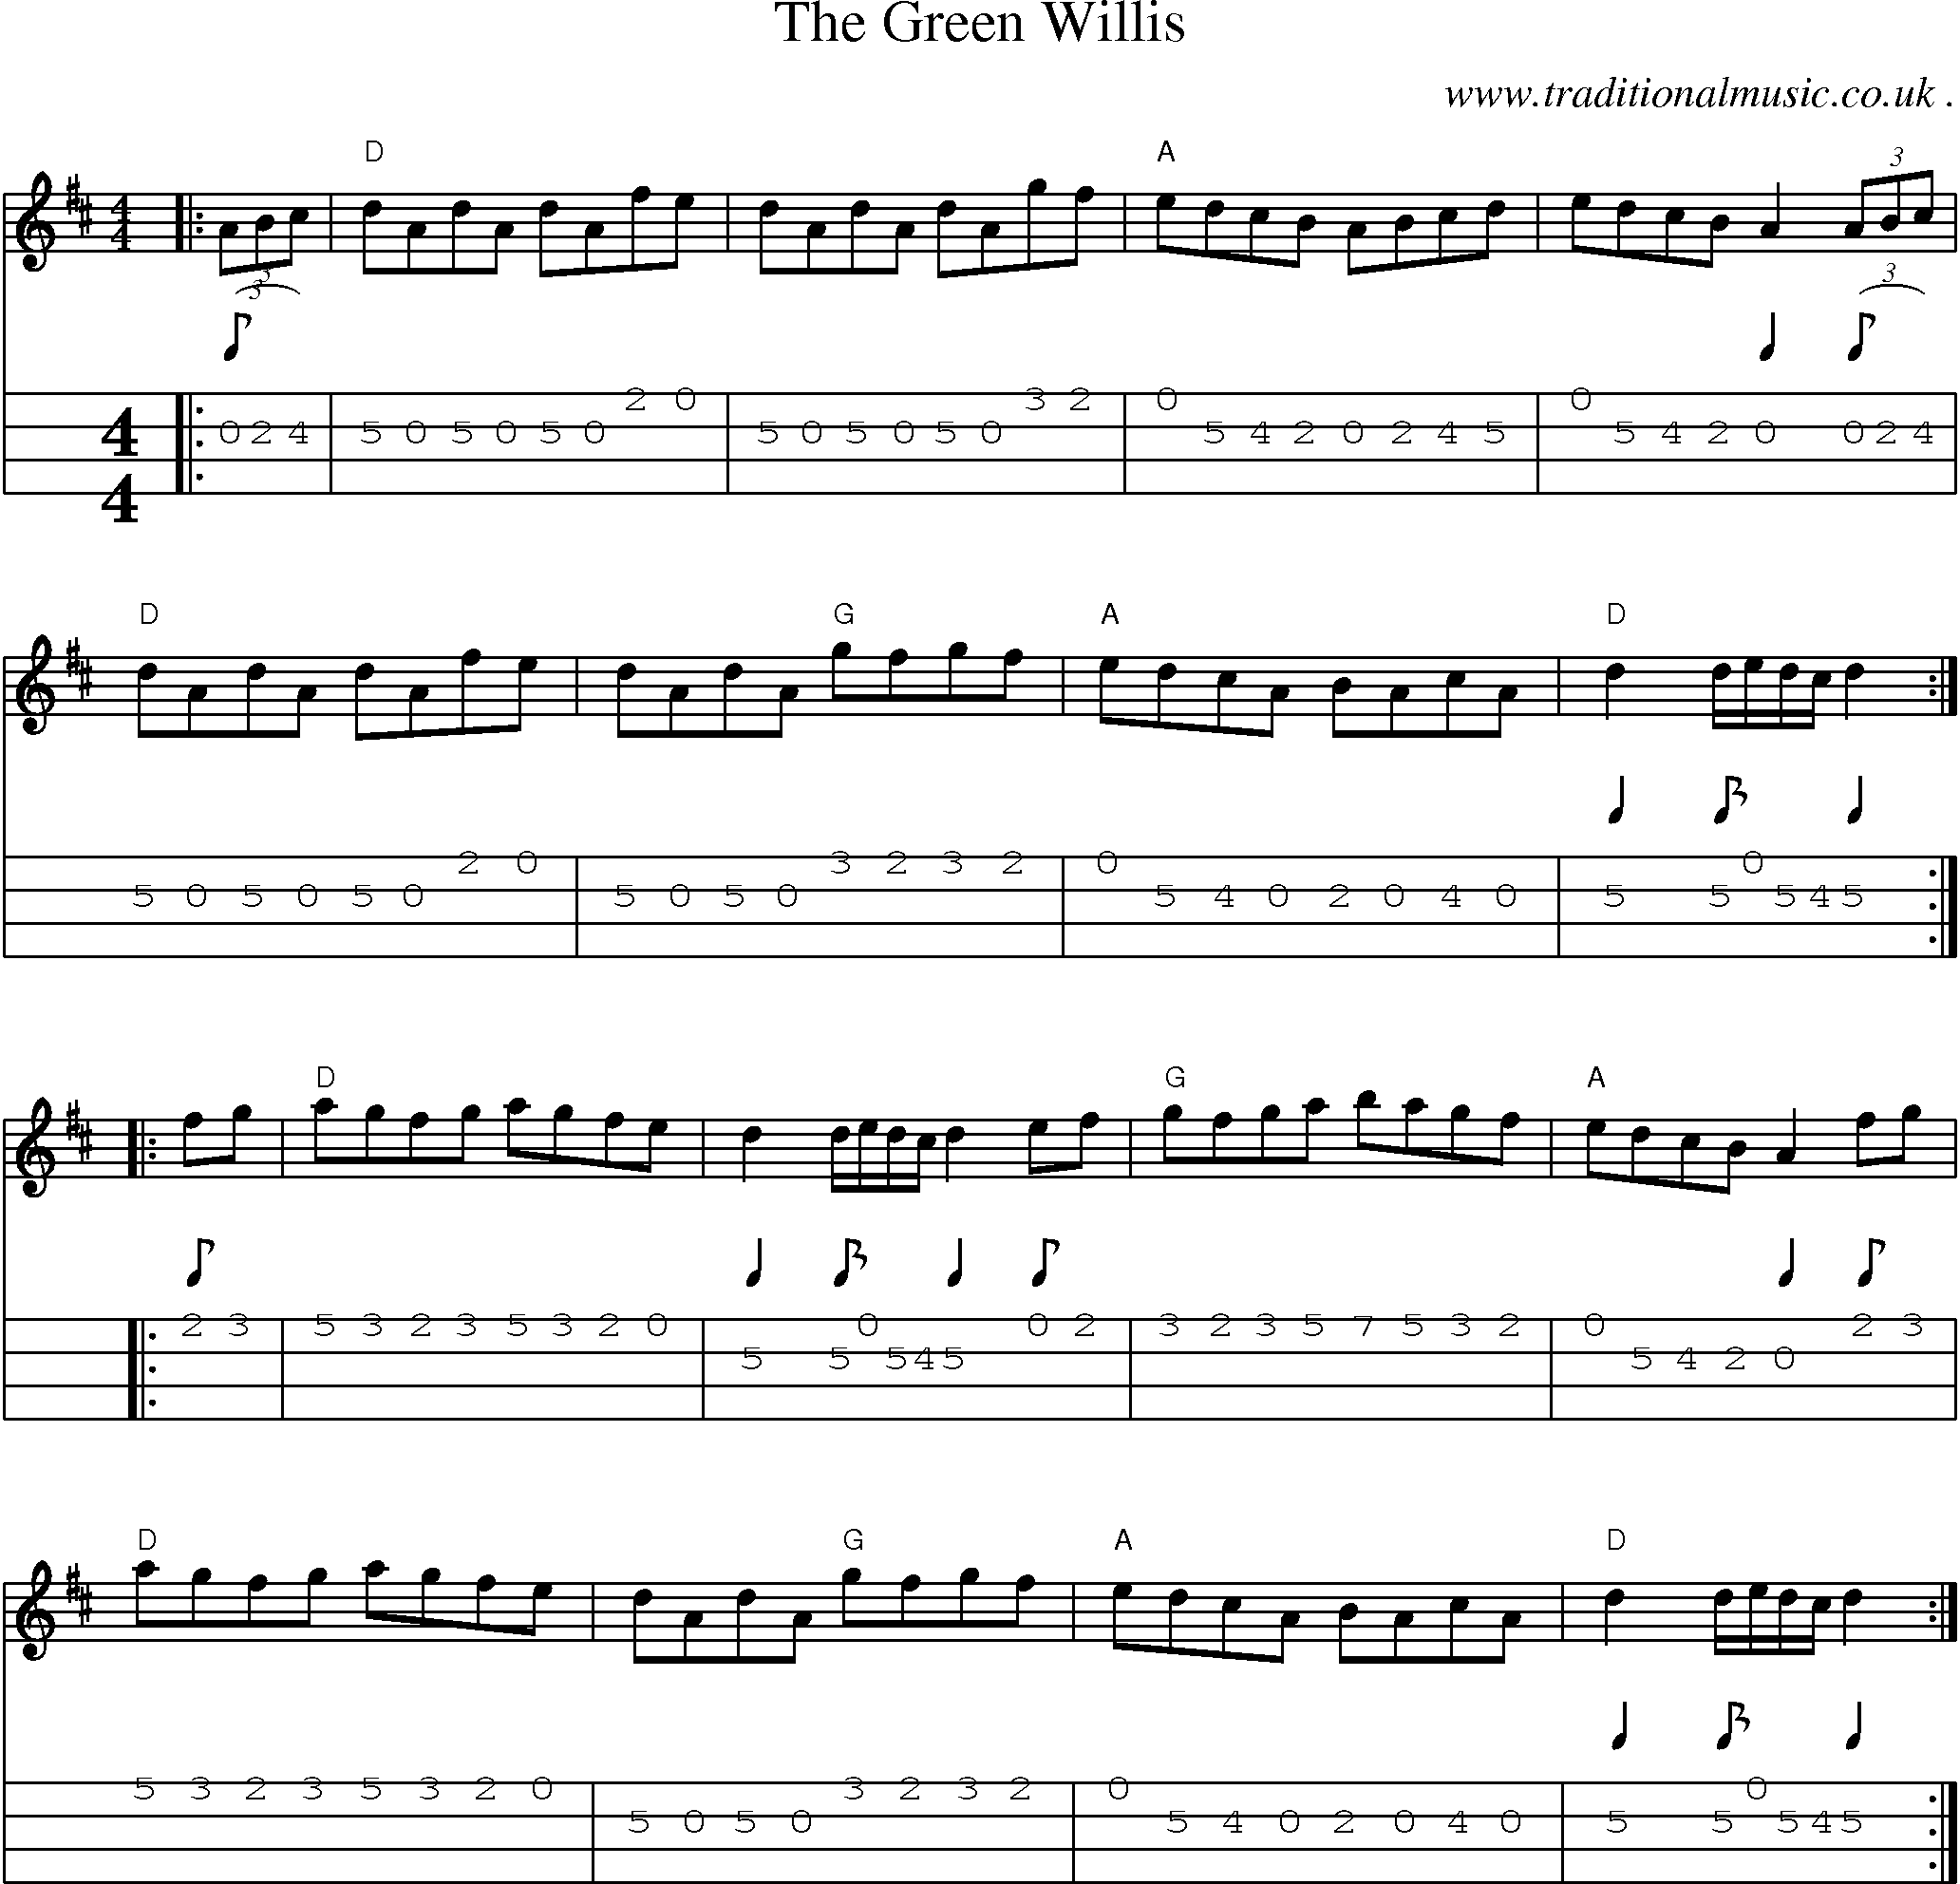 Music Score and Guitar Tabs for The Green Willis